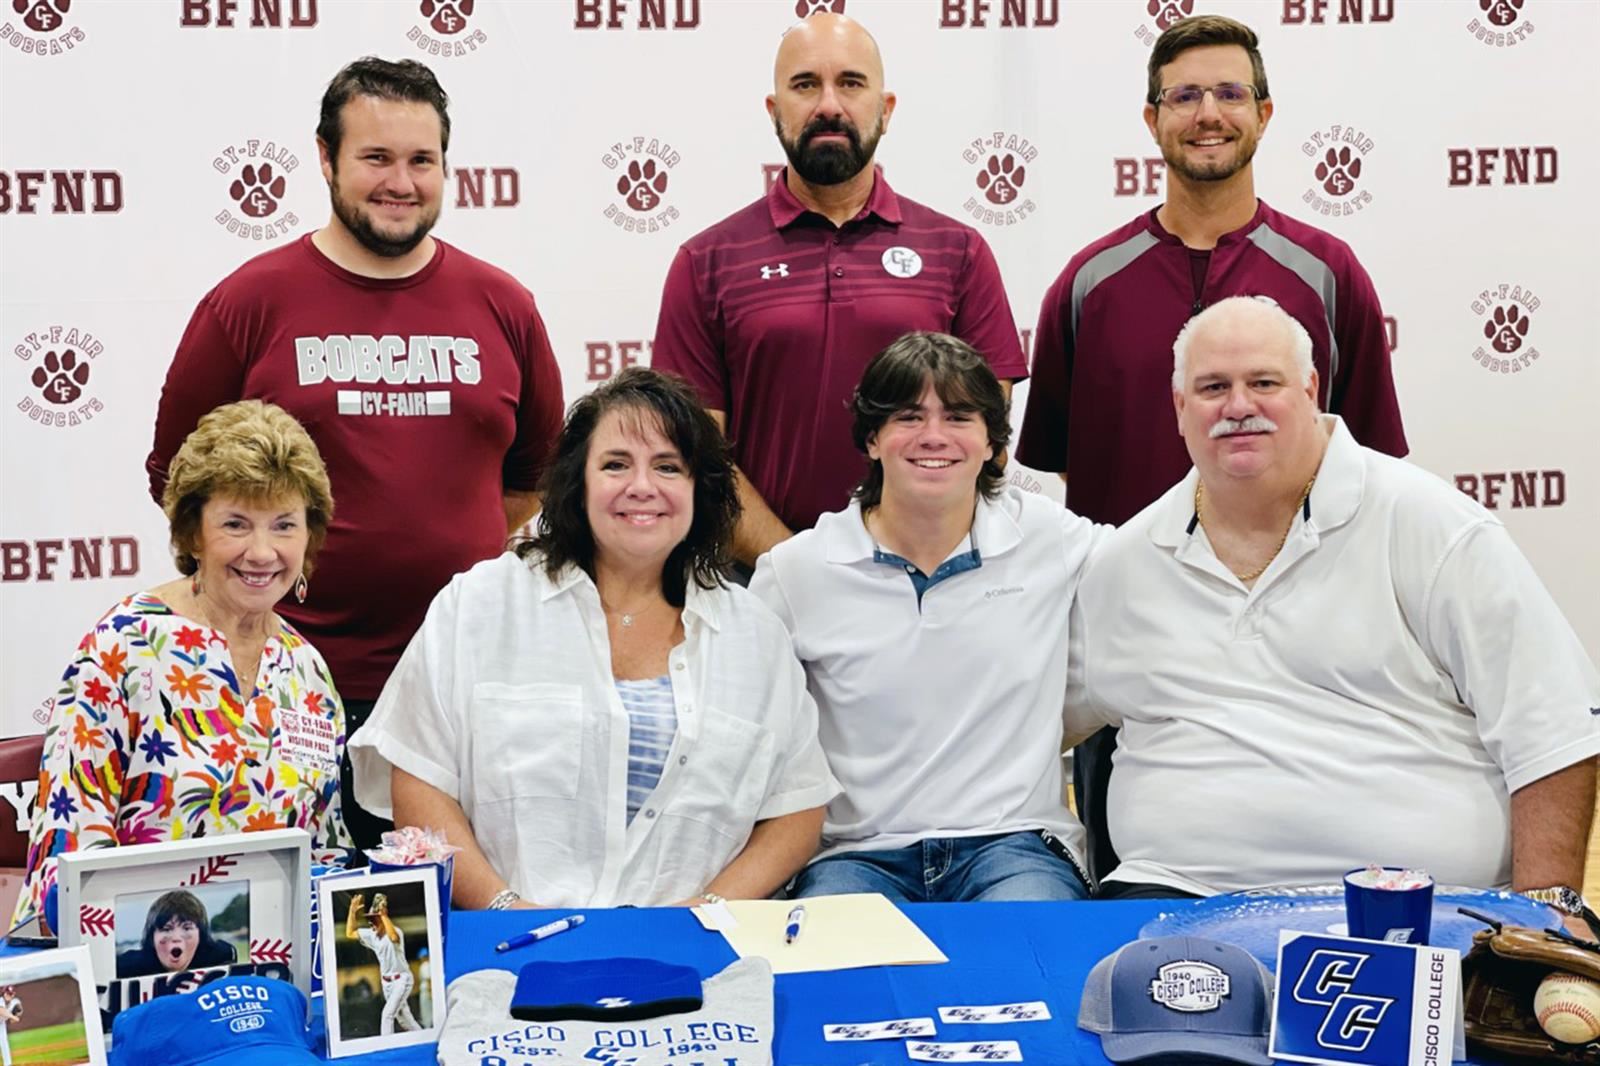 Cy-Fair senior Brayden Vickery, seated second from right, signed a letter of intent to play baseball at Cisco College.